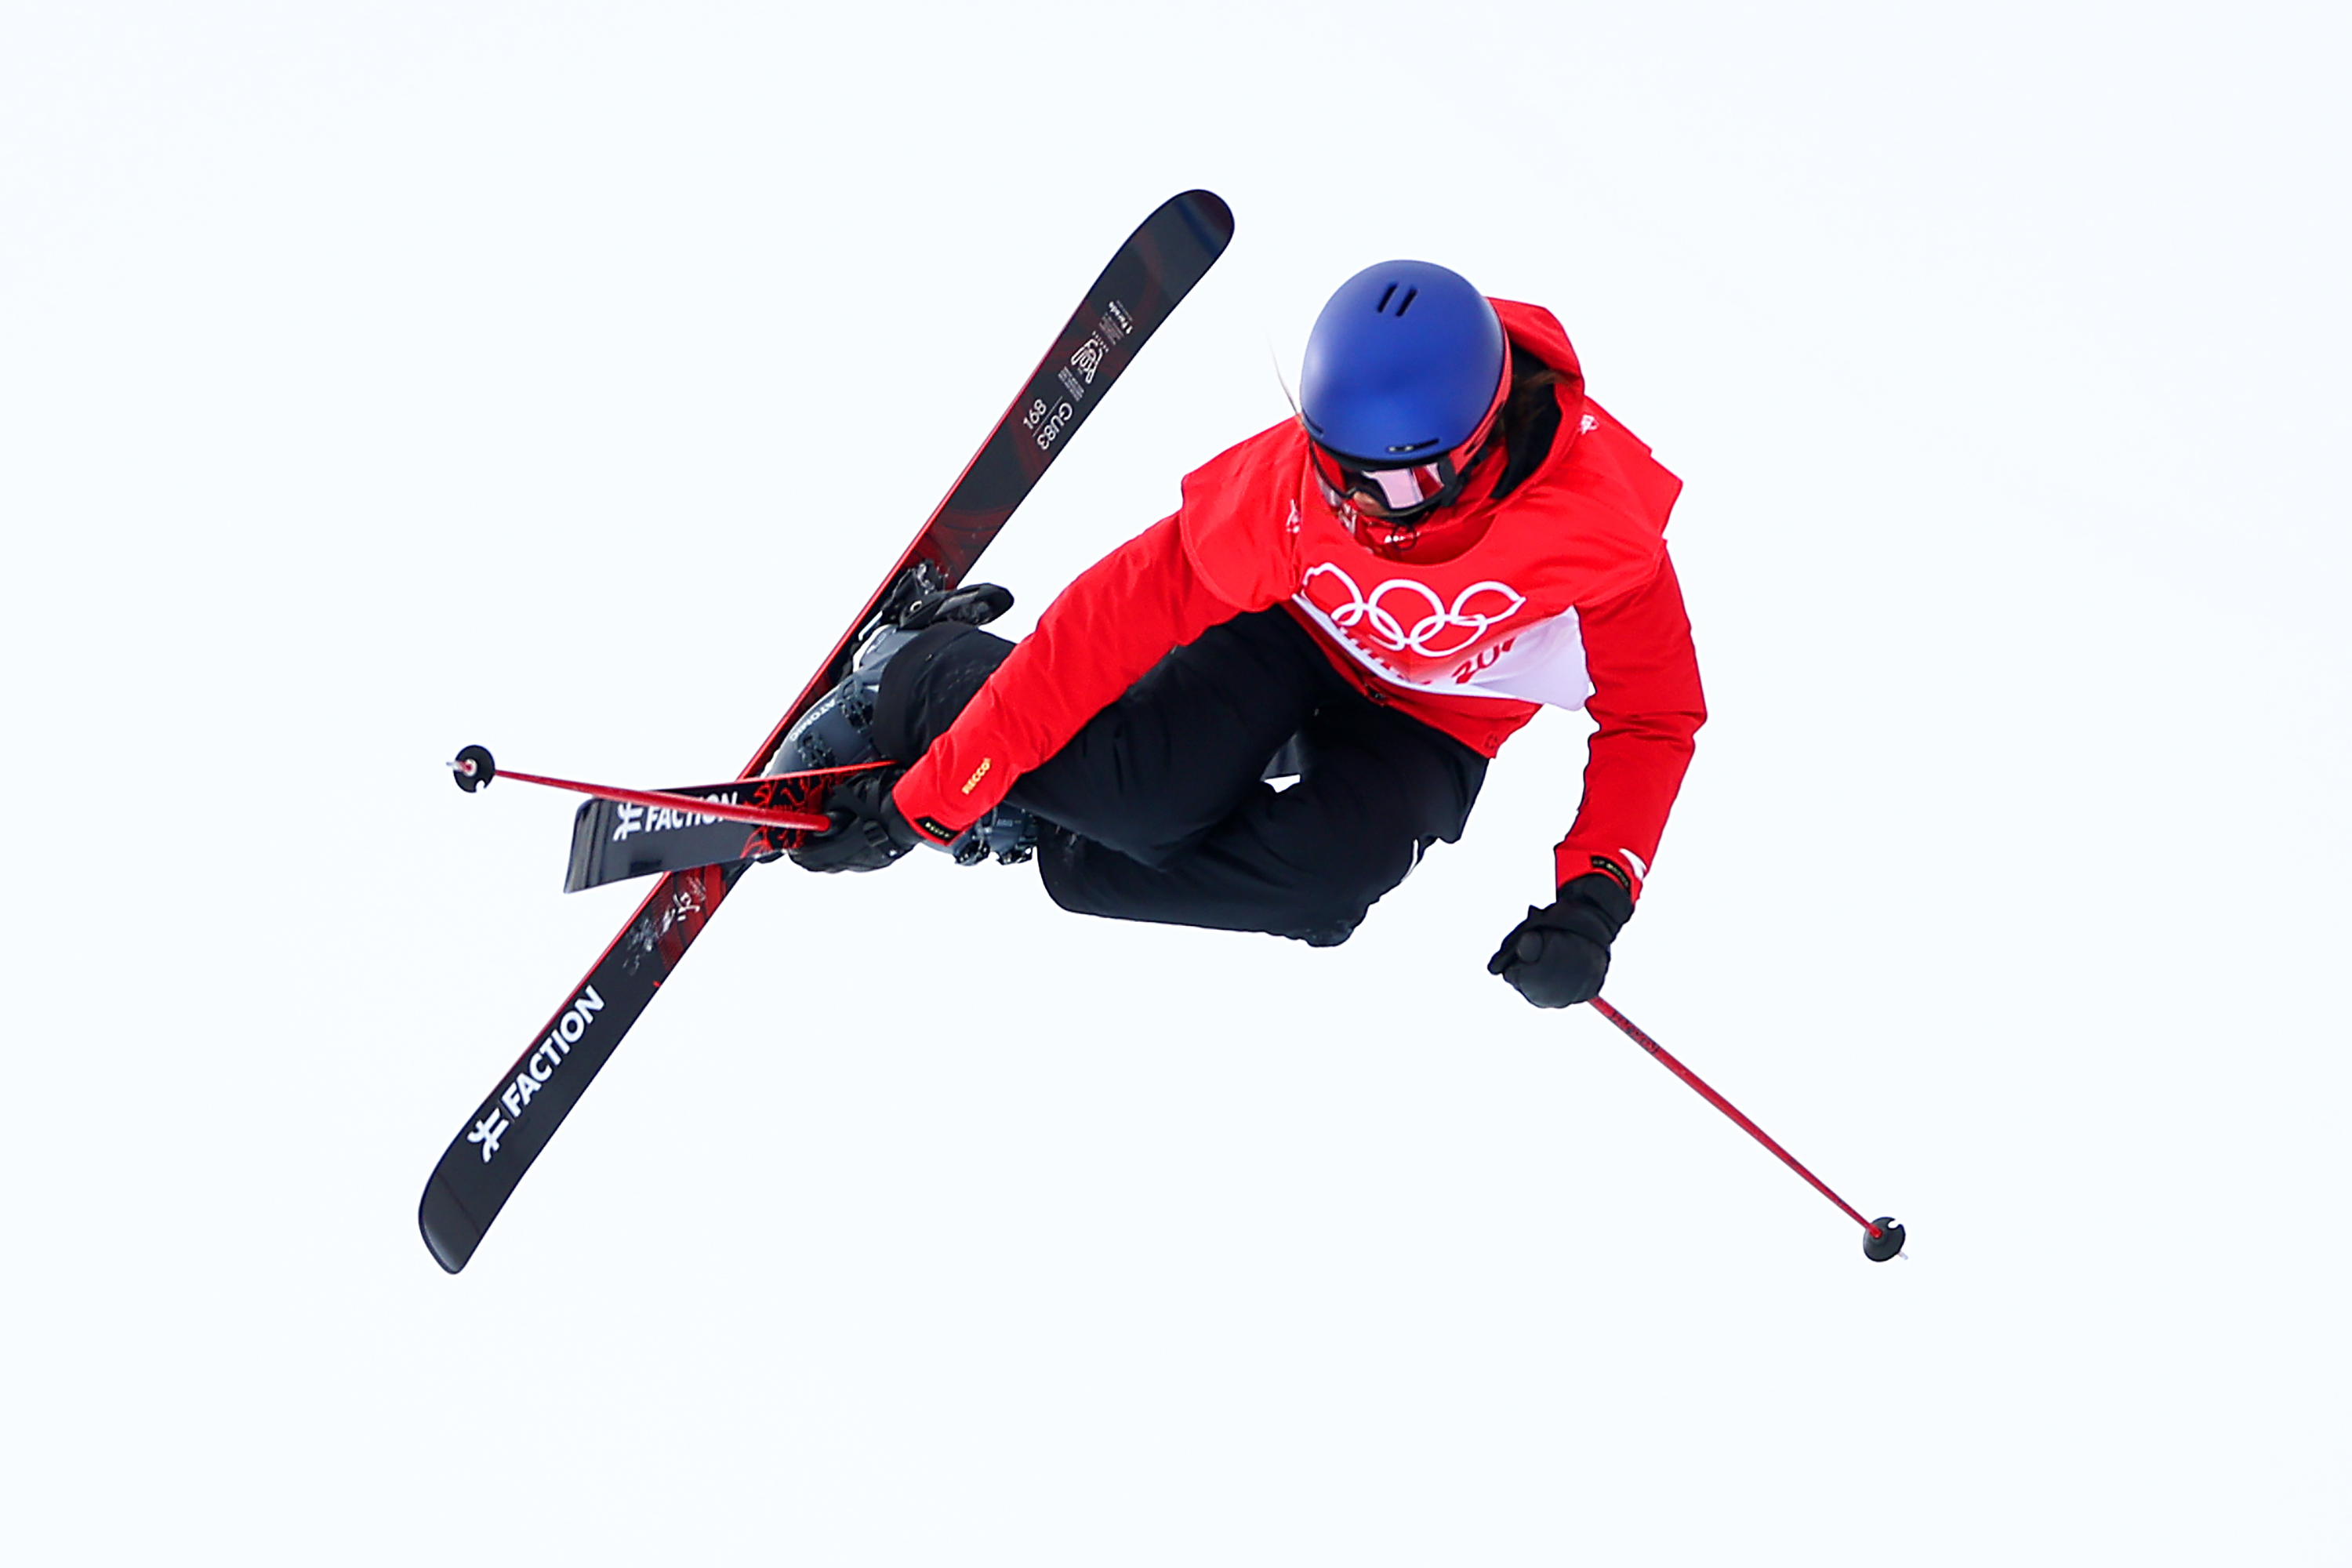 China's Eileen Gu performs a trick during the women's freestyle skiing freeski halfpipe qualification on Thursday.